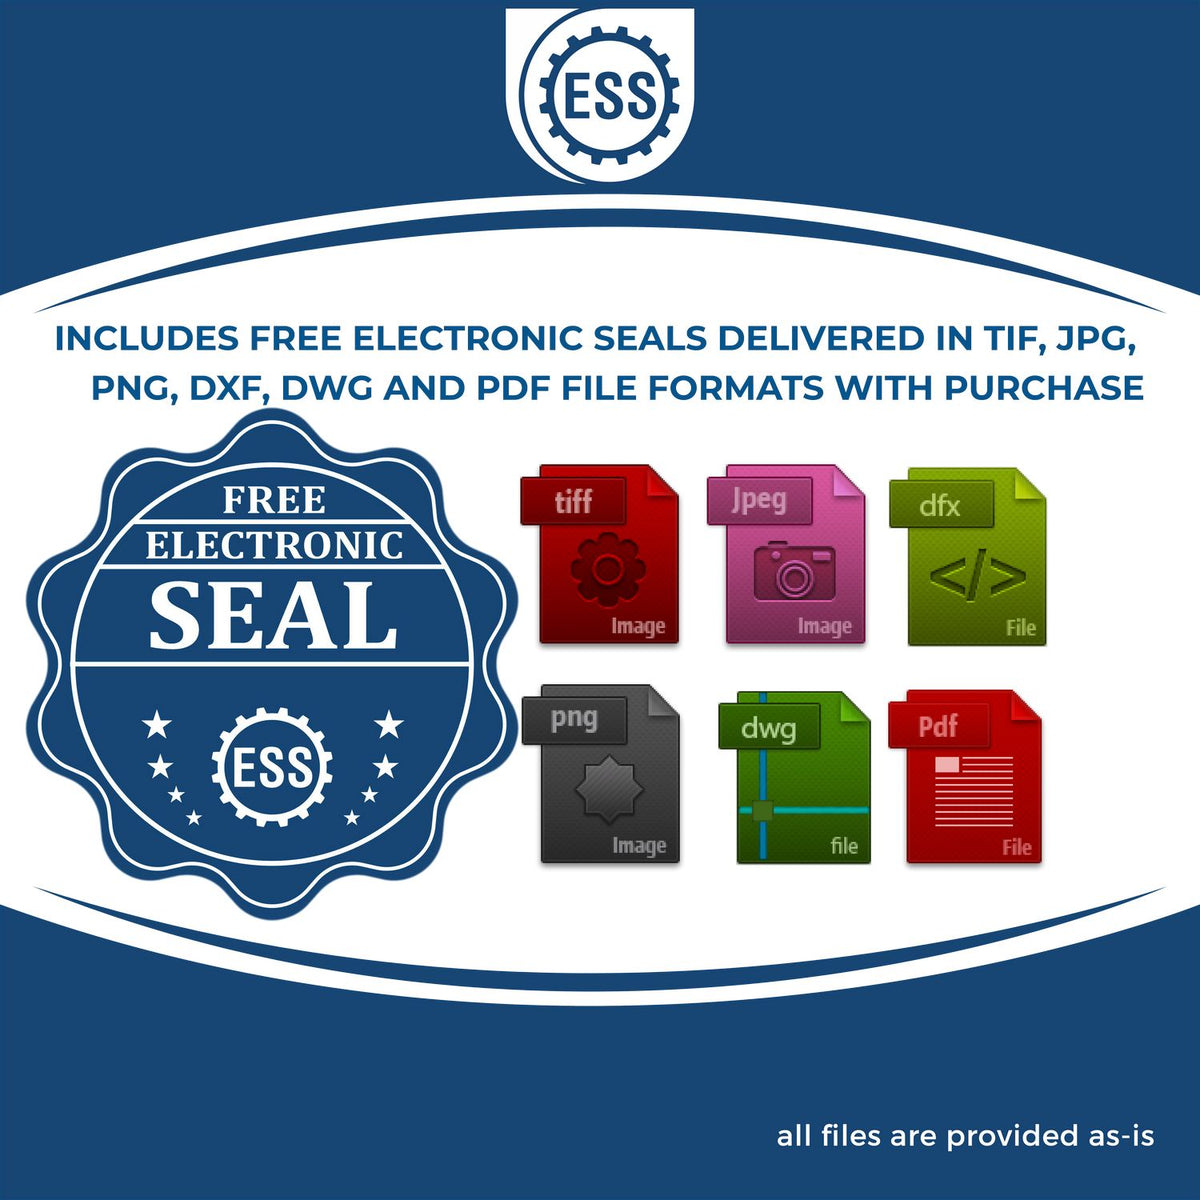 An infographic for the free electronic seal for the Tennessee Desk Architect Embossing Seal illustrating the different file type icons such as DXF, DWG, TIF, JPG and PNG.